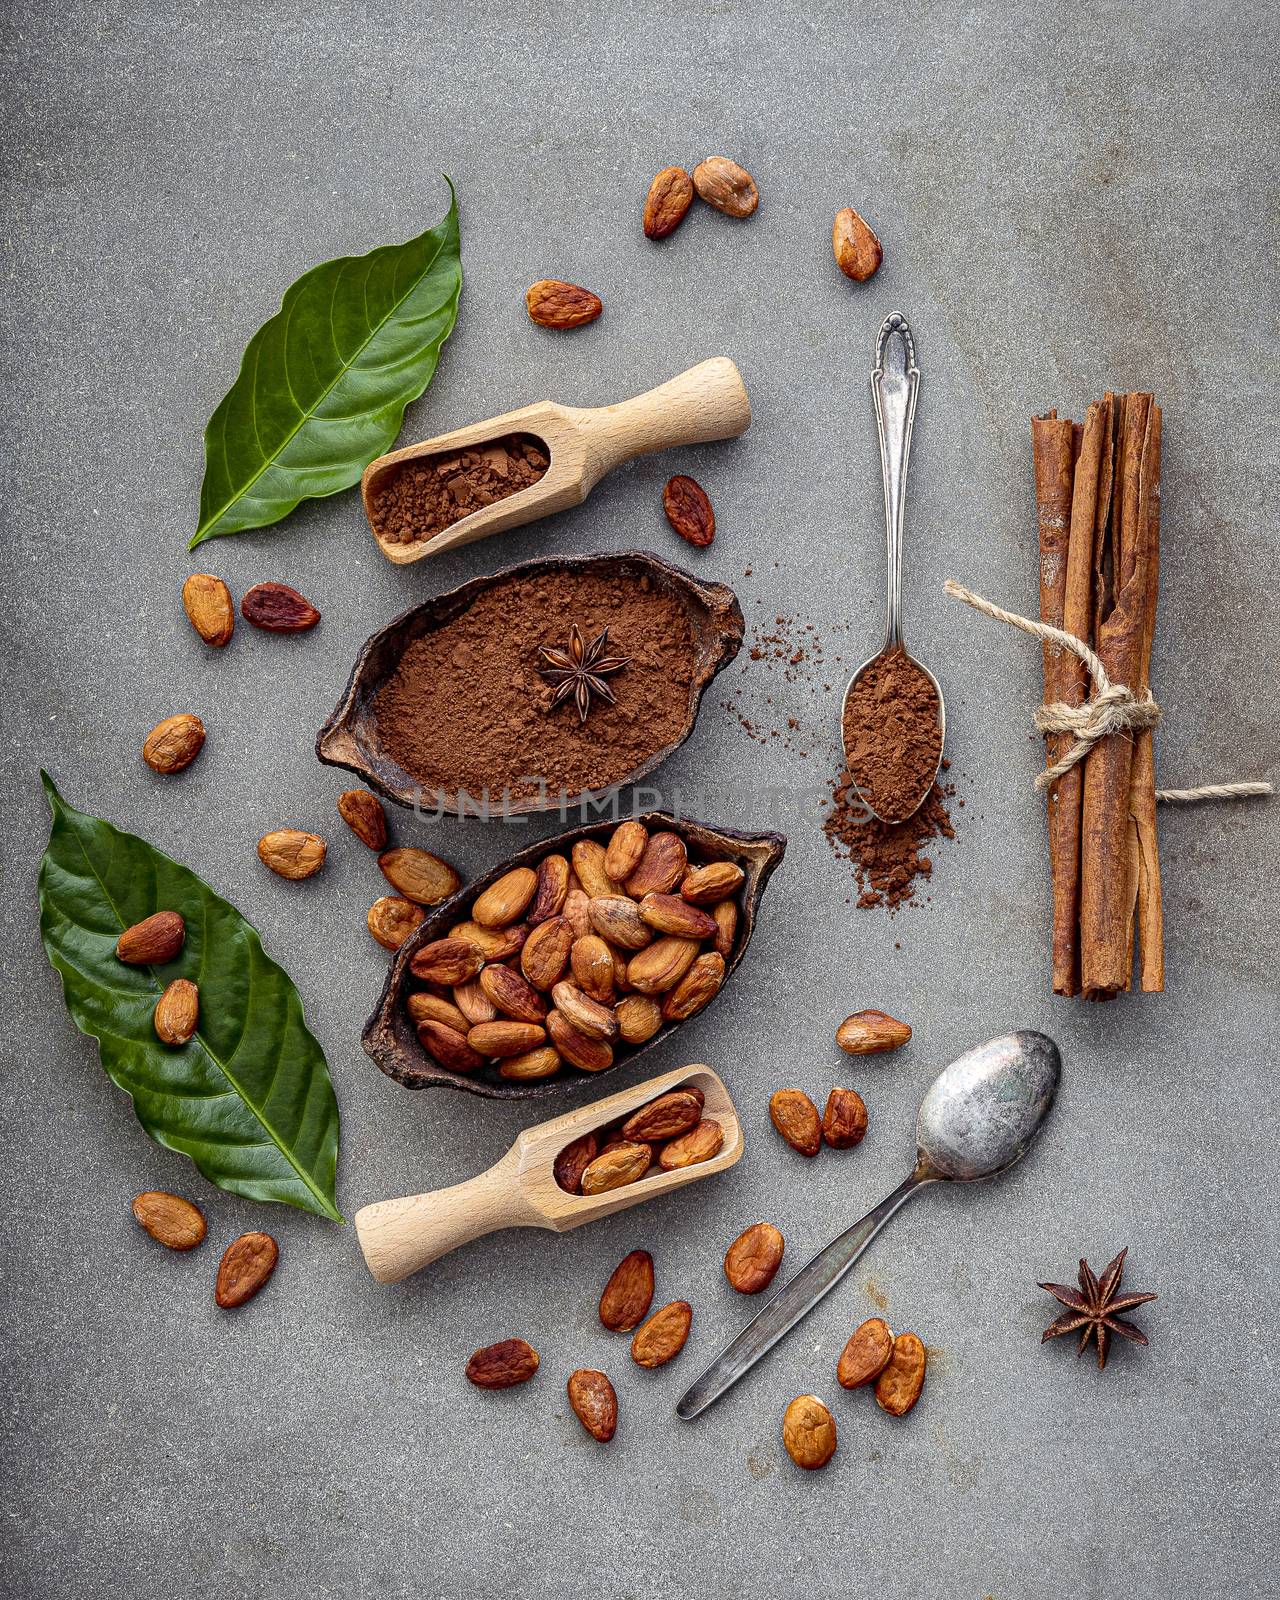 Cocoa powder and cacao beans on concrete background. by kerdkanno